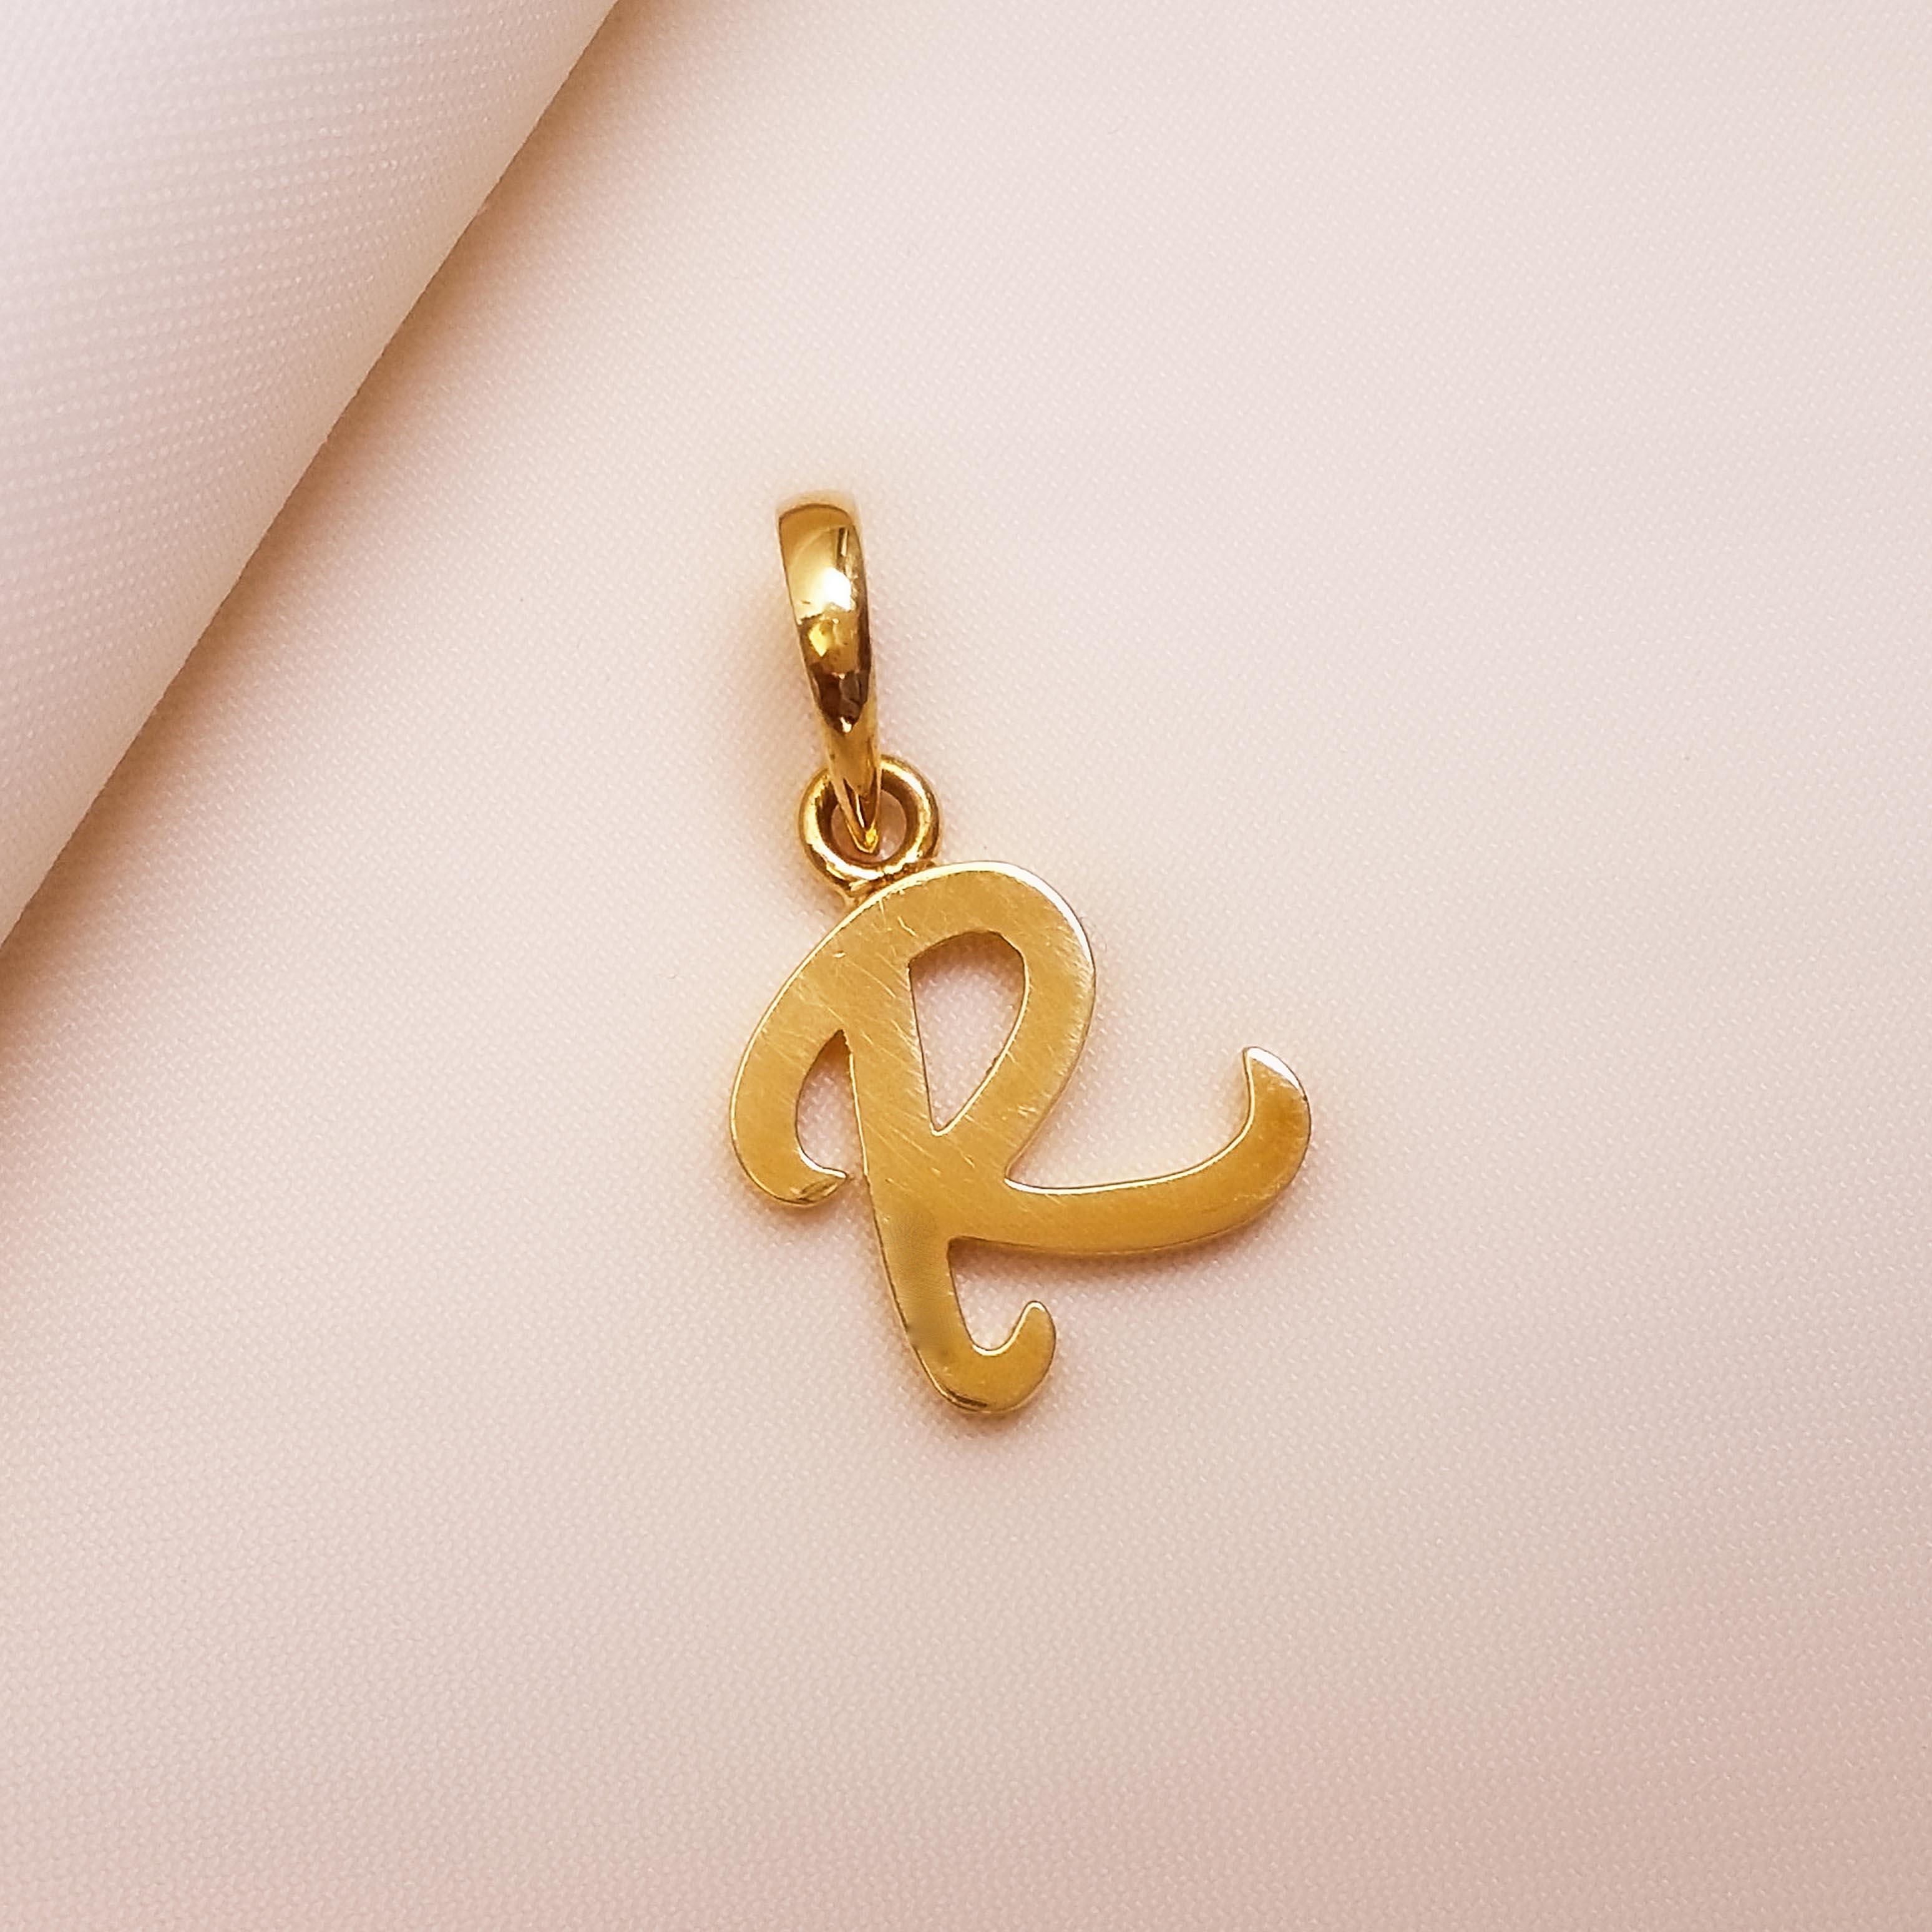 Buy R Reveal Gold Letter Pendant 22 KT yellow gold (1.467 gm). | Online By Giriraj Jewellers